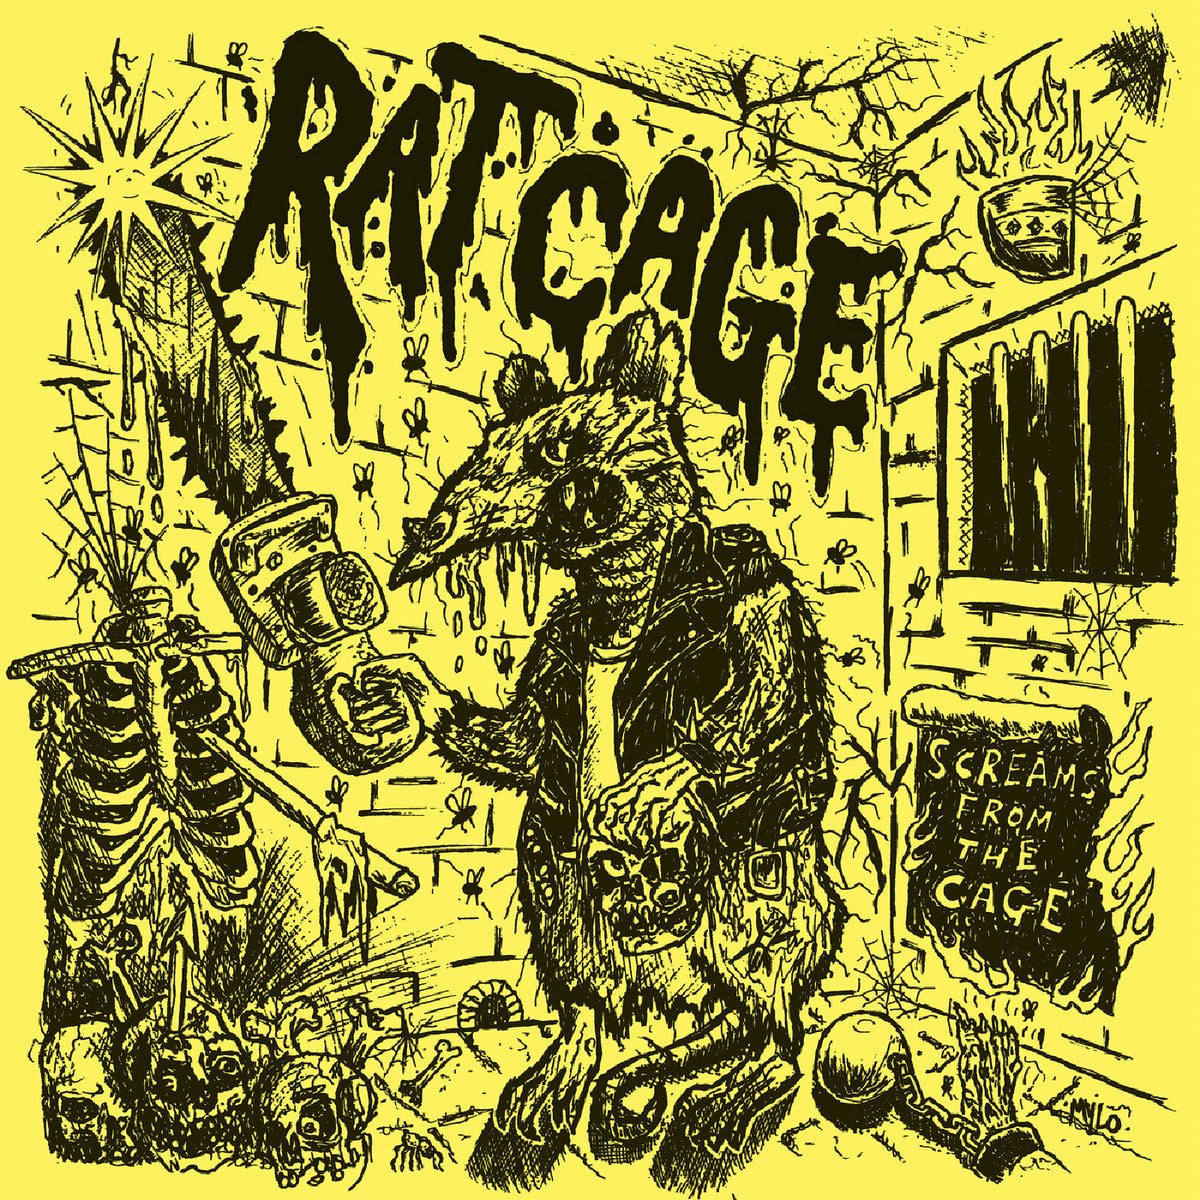 56. Rat Cage - Screams From The Cage (one of the best album covers of the year and perhaps the best straight up kick ass rock n roll record too)